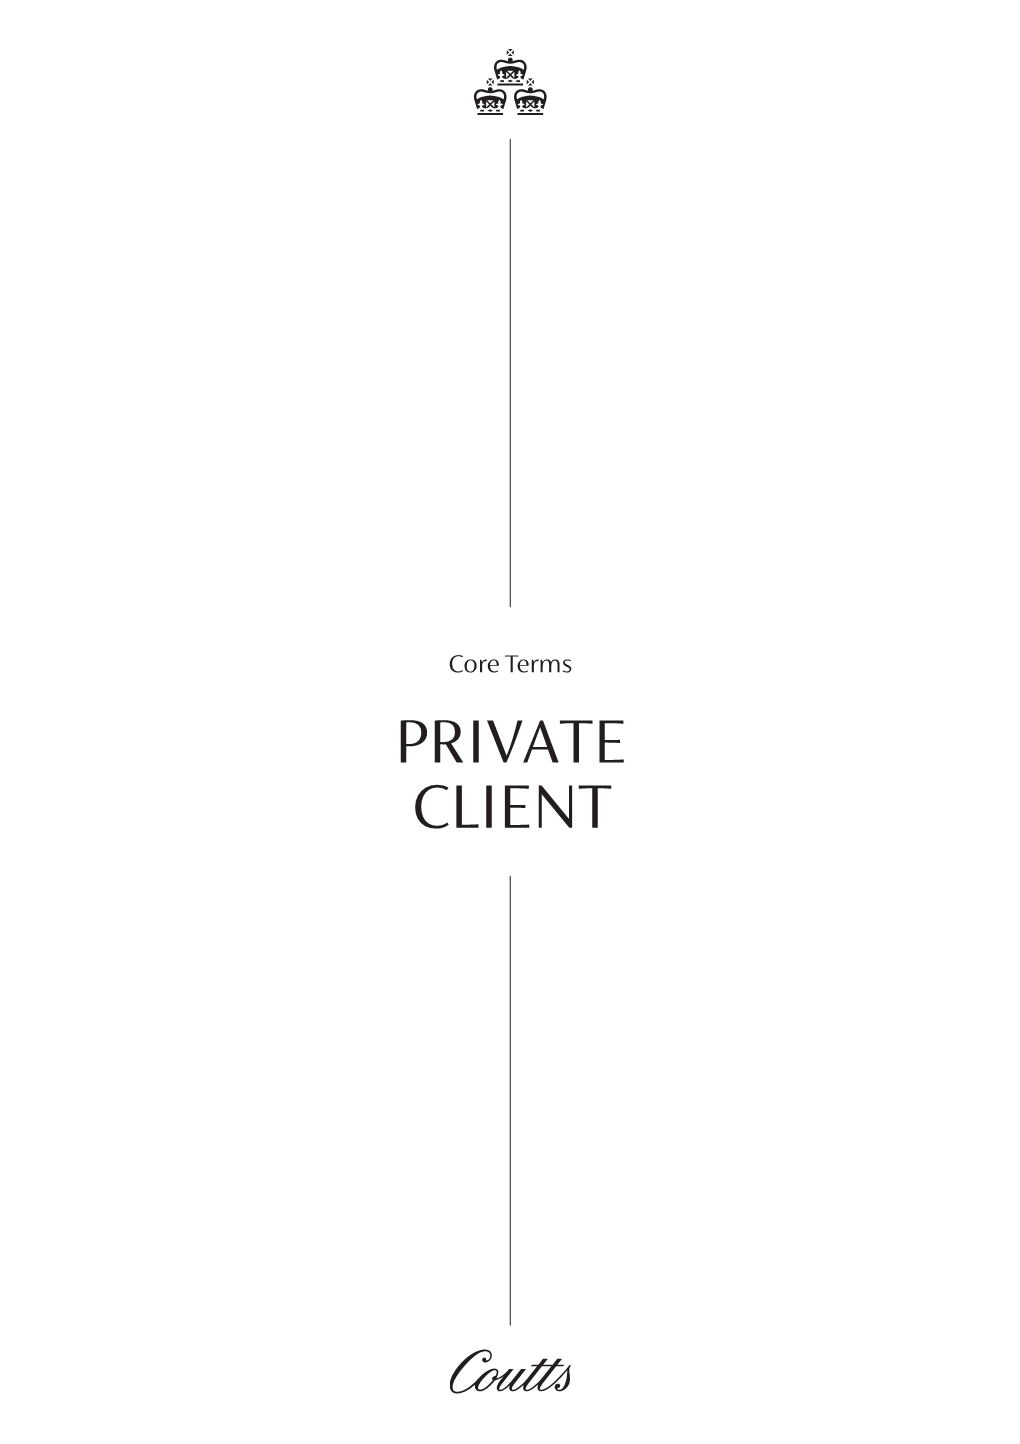 Core Terms PRIVATE CLIENT